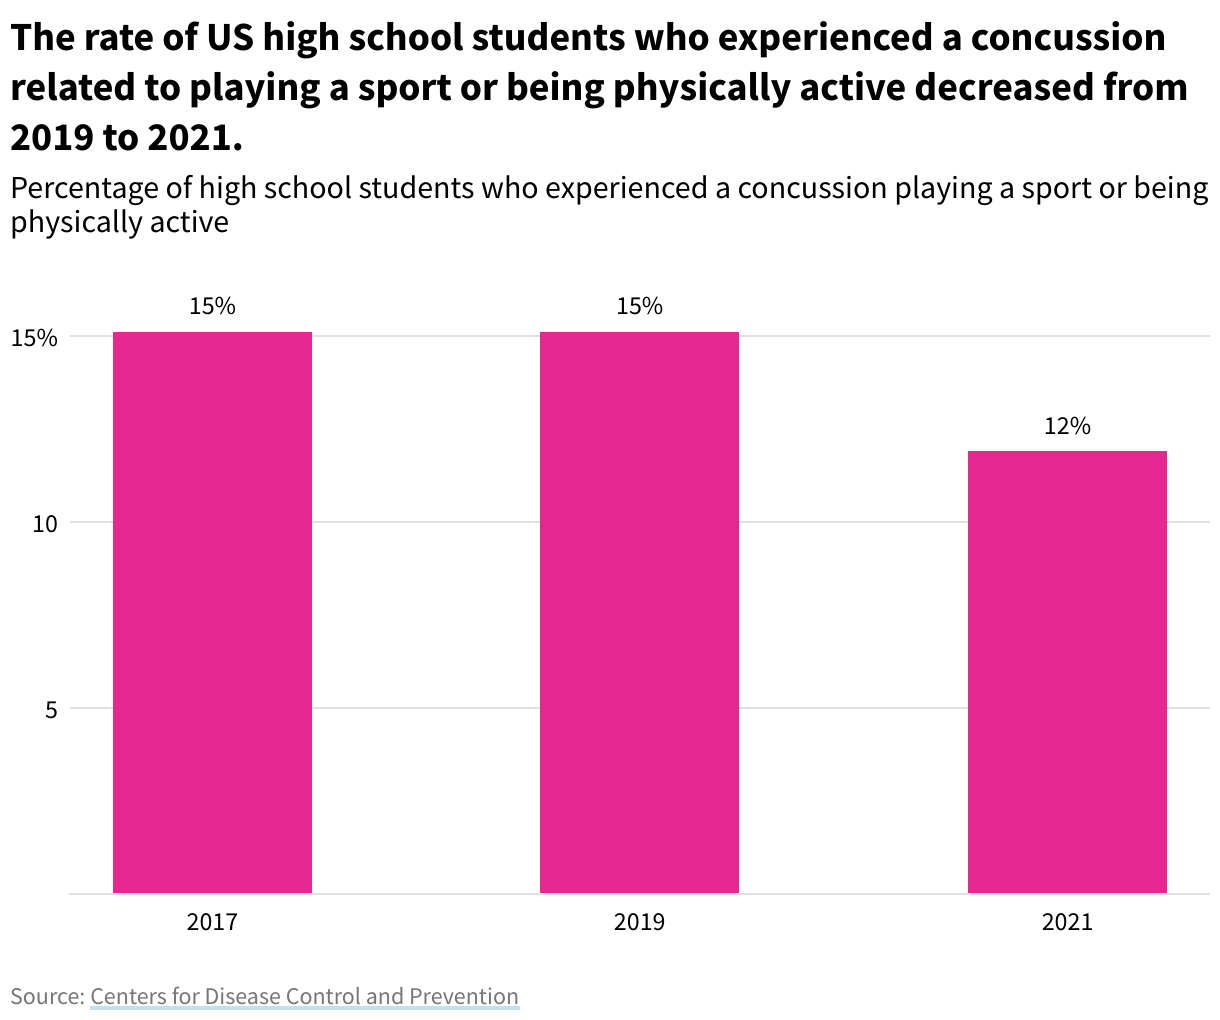 Line graph of the prevalence of high school students that experienced a concussion in 2017, 2019, and 2021 showing a decline in concussions in 2021. Data available at https://yrbs-explorer.services.cdc.gov/#/graphs?questionCode=H81&amp;topicCode=C06&amp;location=XX&amp;year=2021